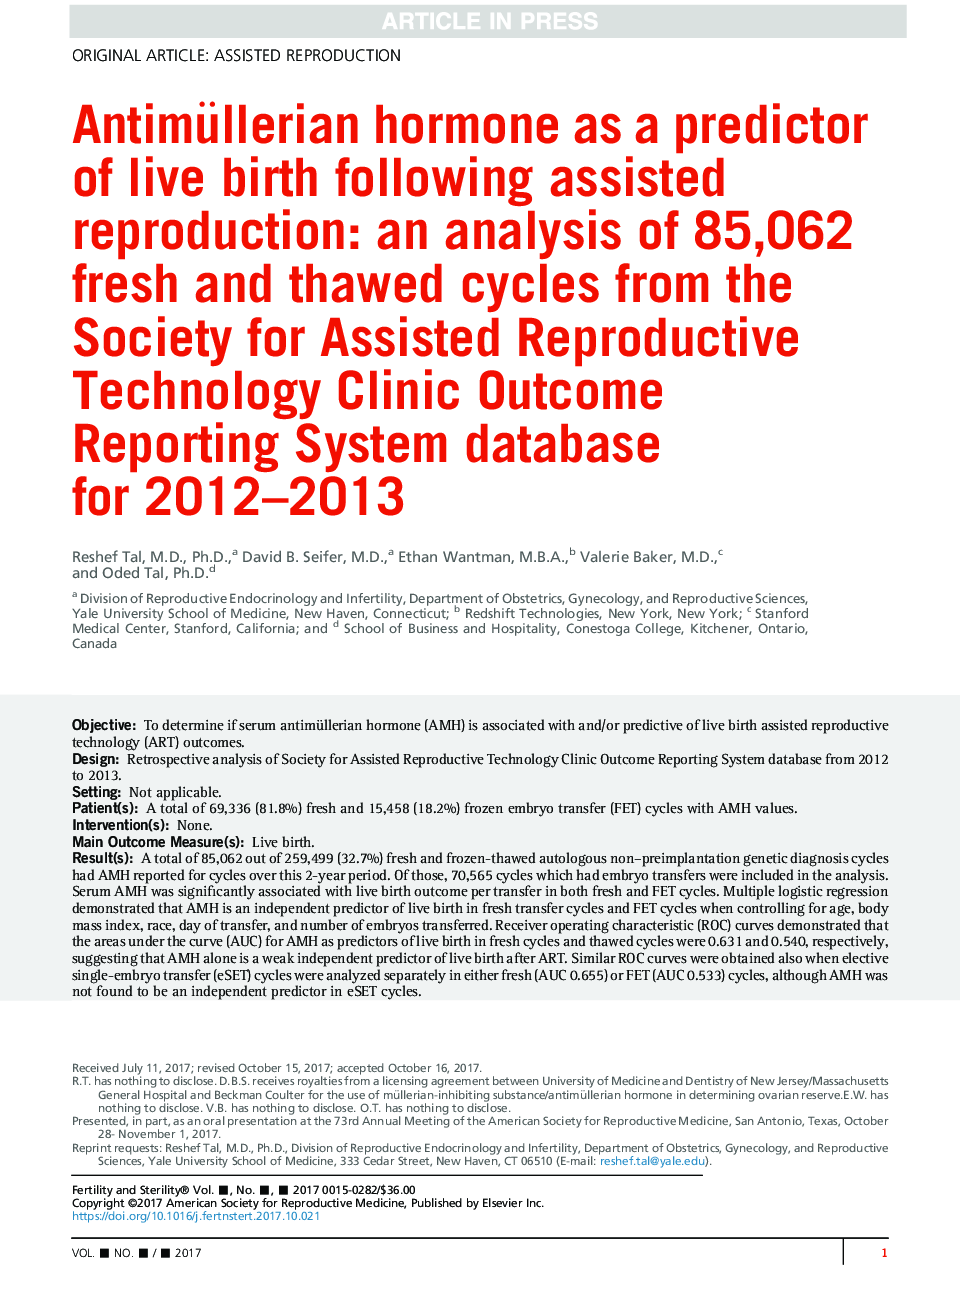 Antimüllerian hormone as a predictor of live birth following assisted reproduction: an analysis of 85,062 fresh and thawed cycles from the Society for Assisted Reproductive Technology Clinic Outcome Reporting System database for 2012-2013